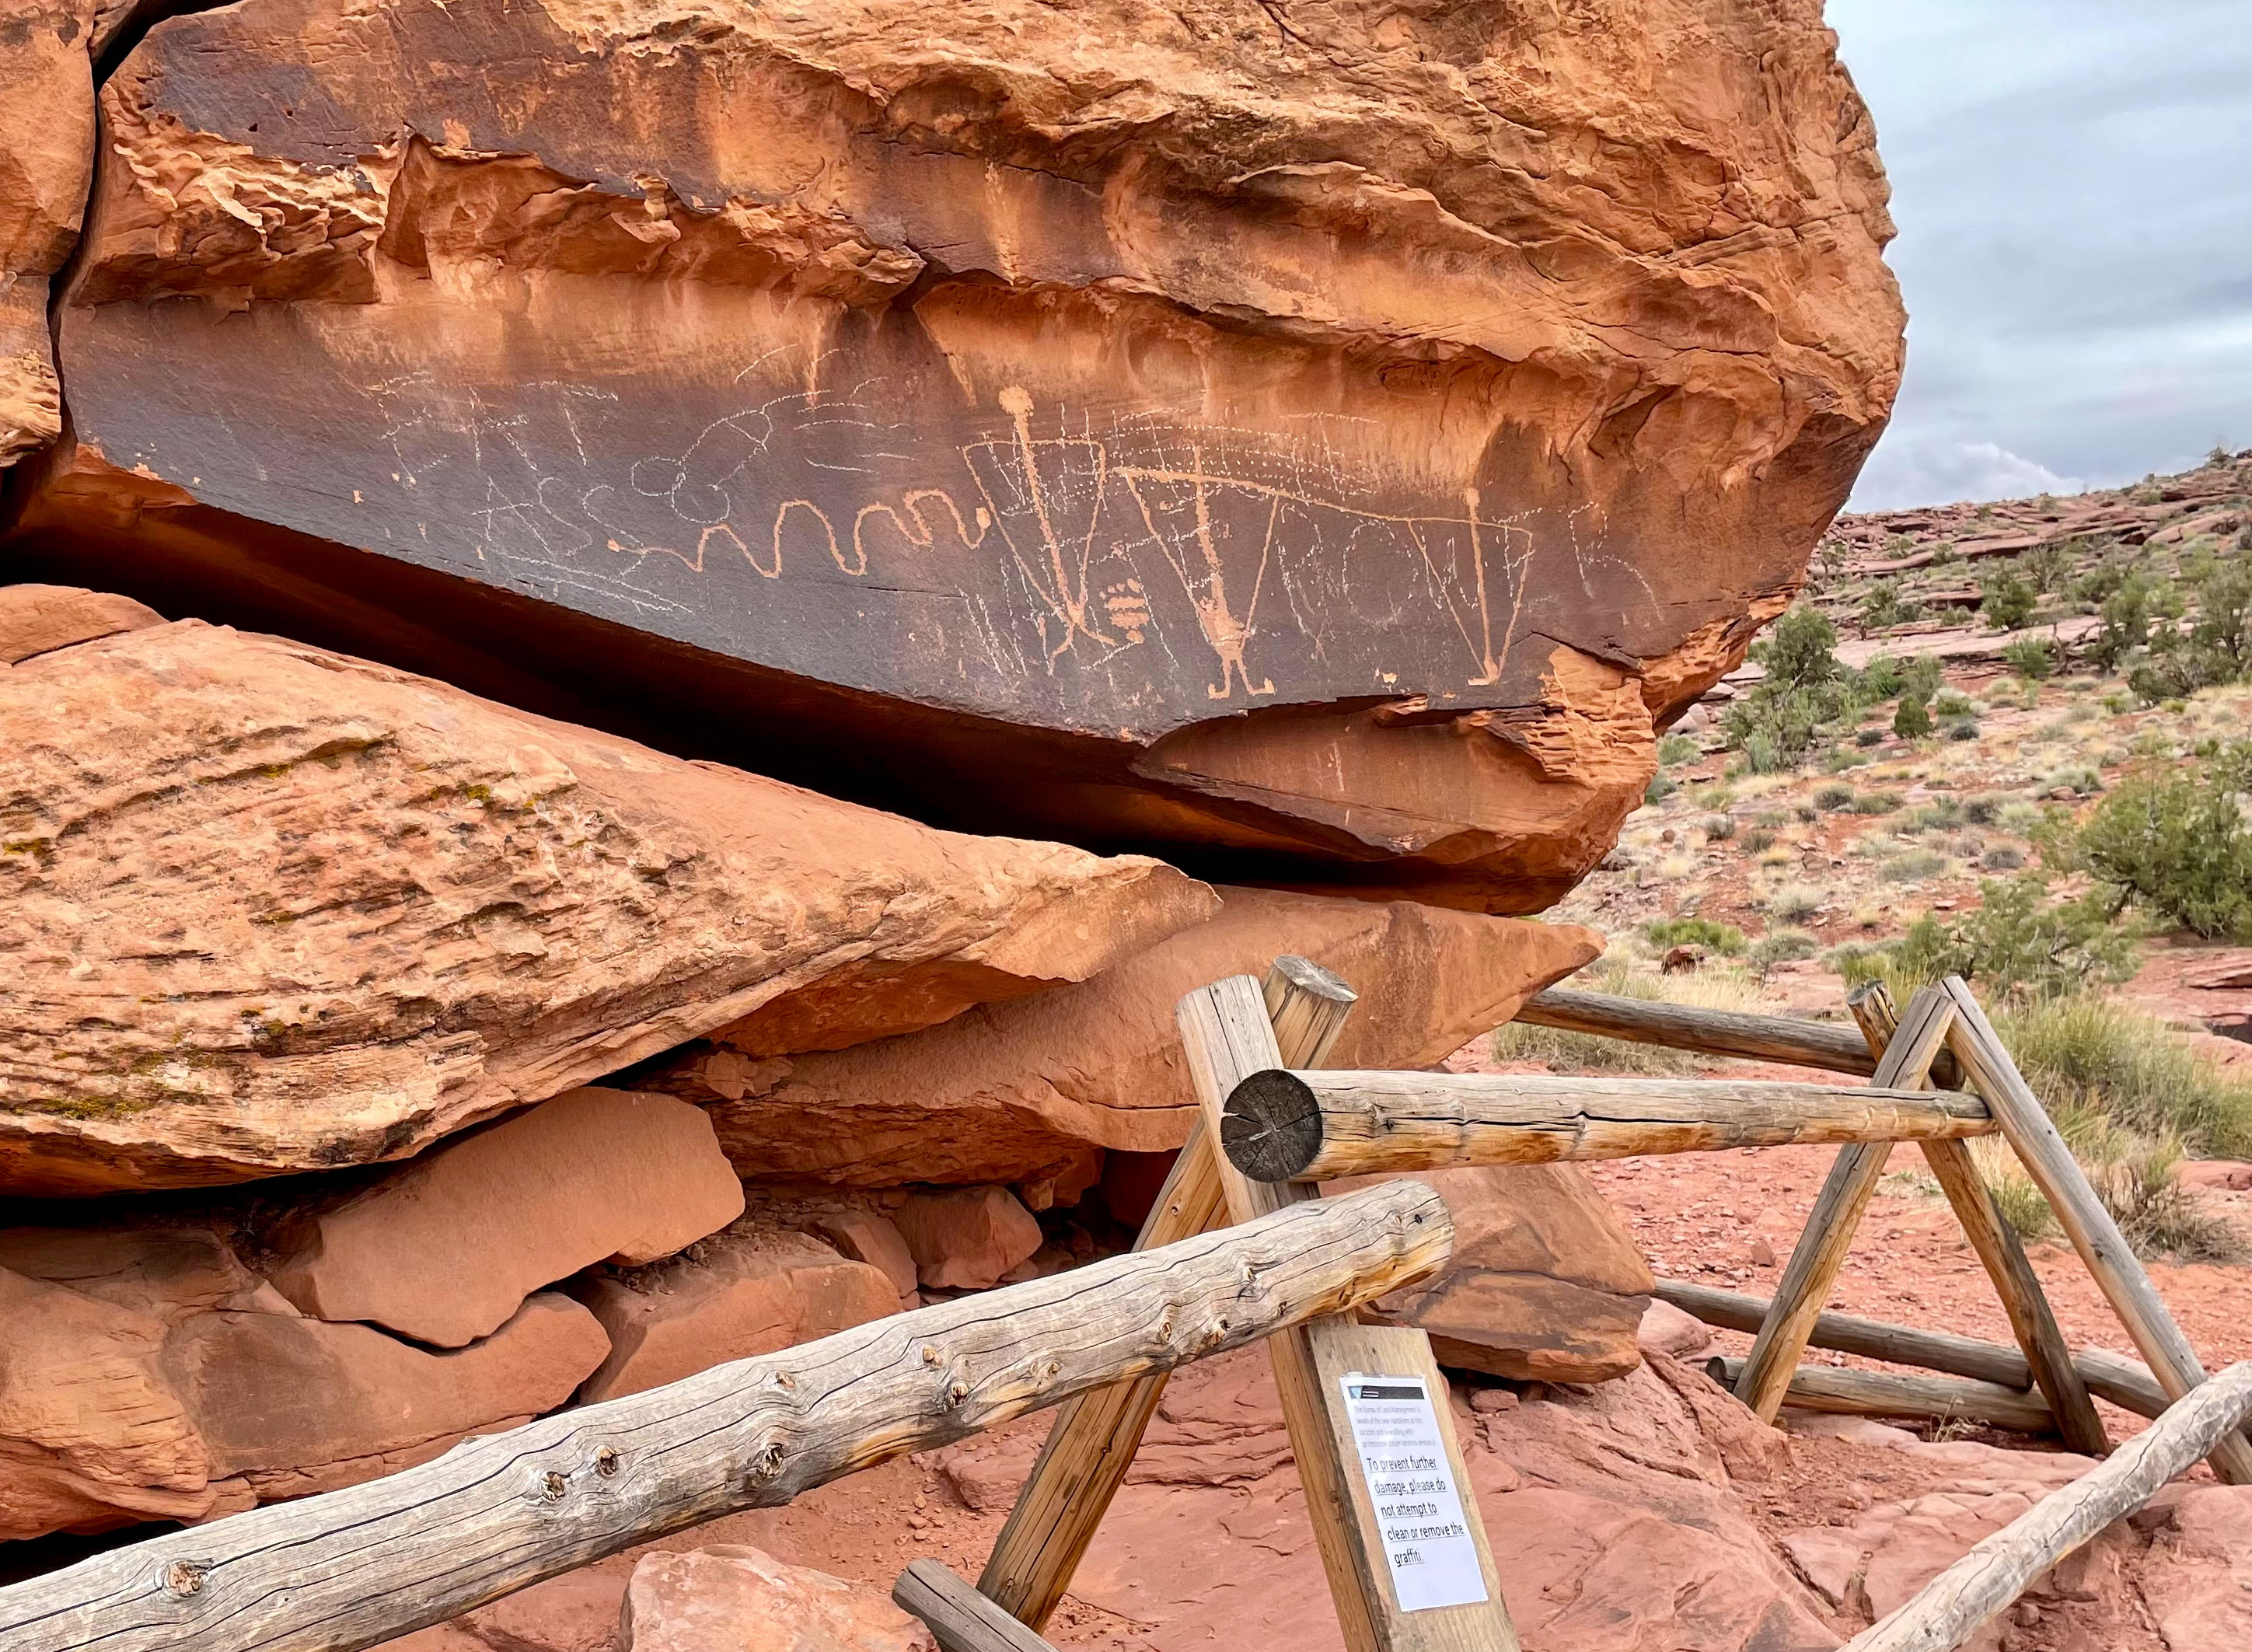 the words "EAT ASS" and "WHITE POWER" drawn over one of the panels of Birthing Rock, apparently in white chalk